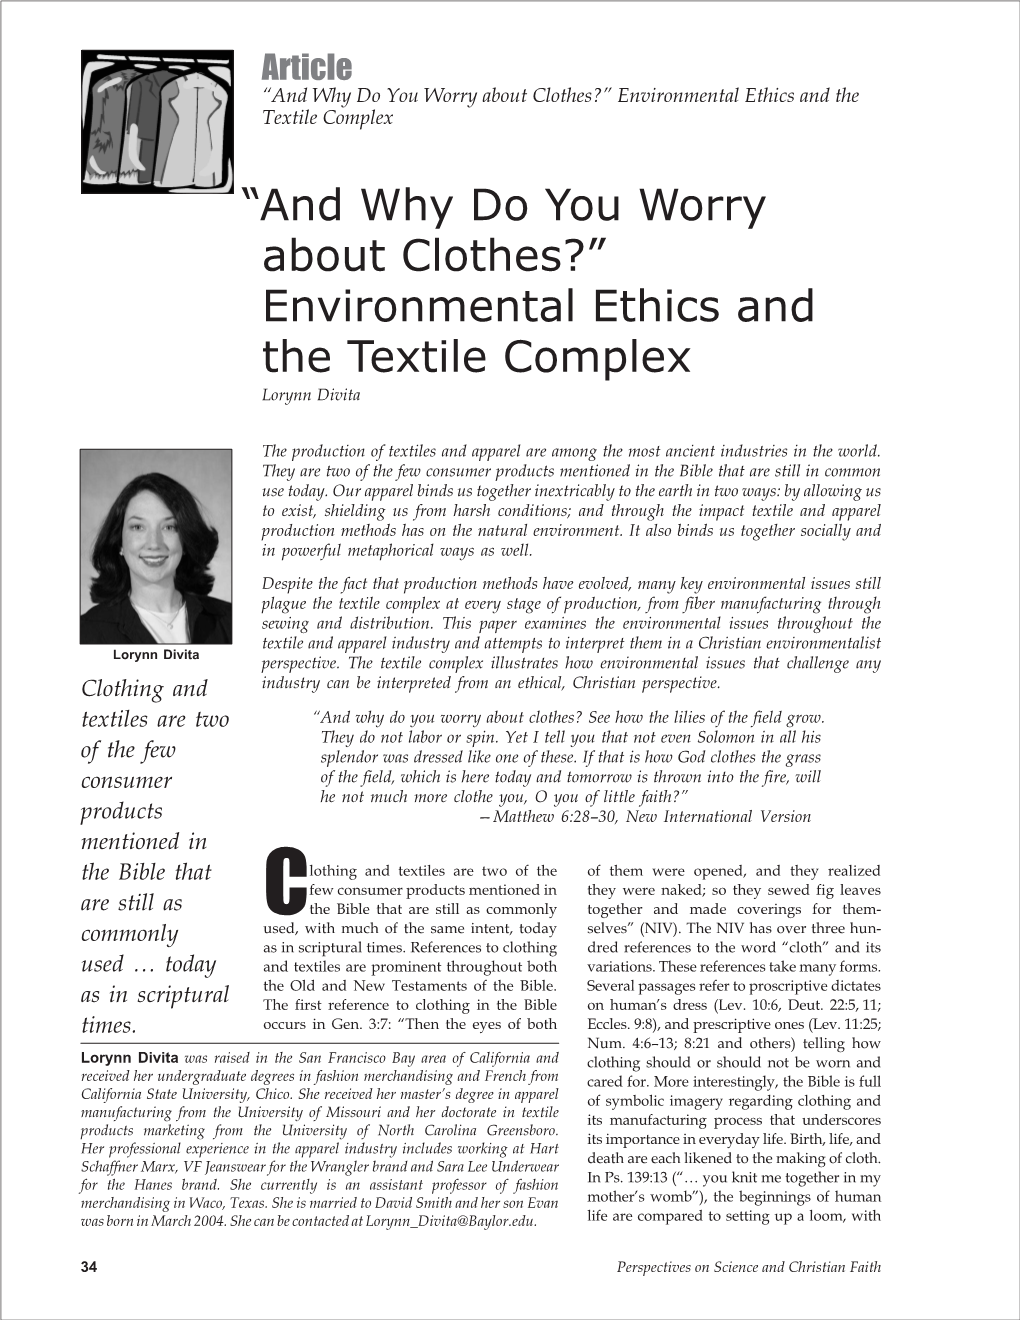 Environmental Ethics and the Textile Complex